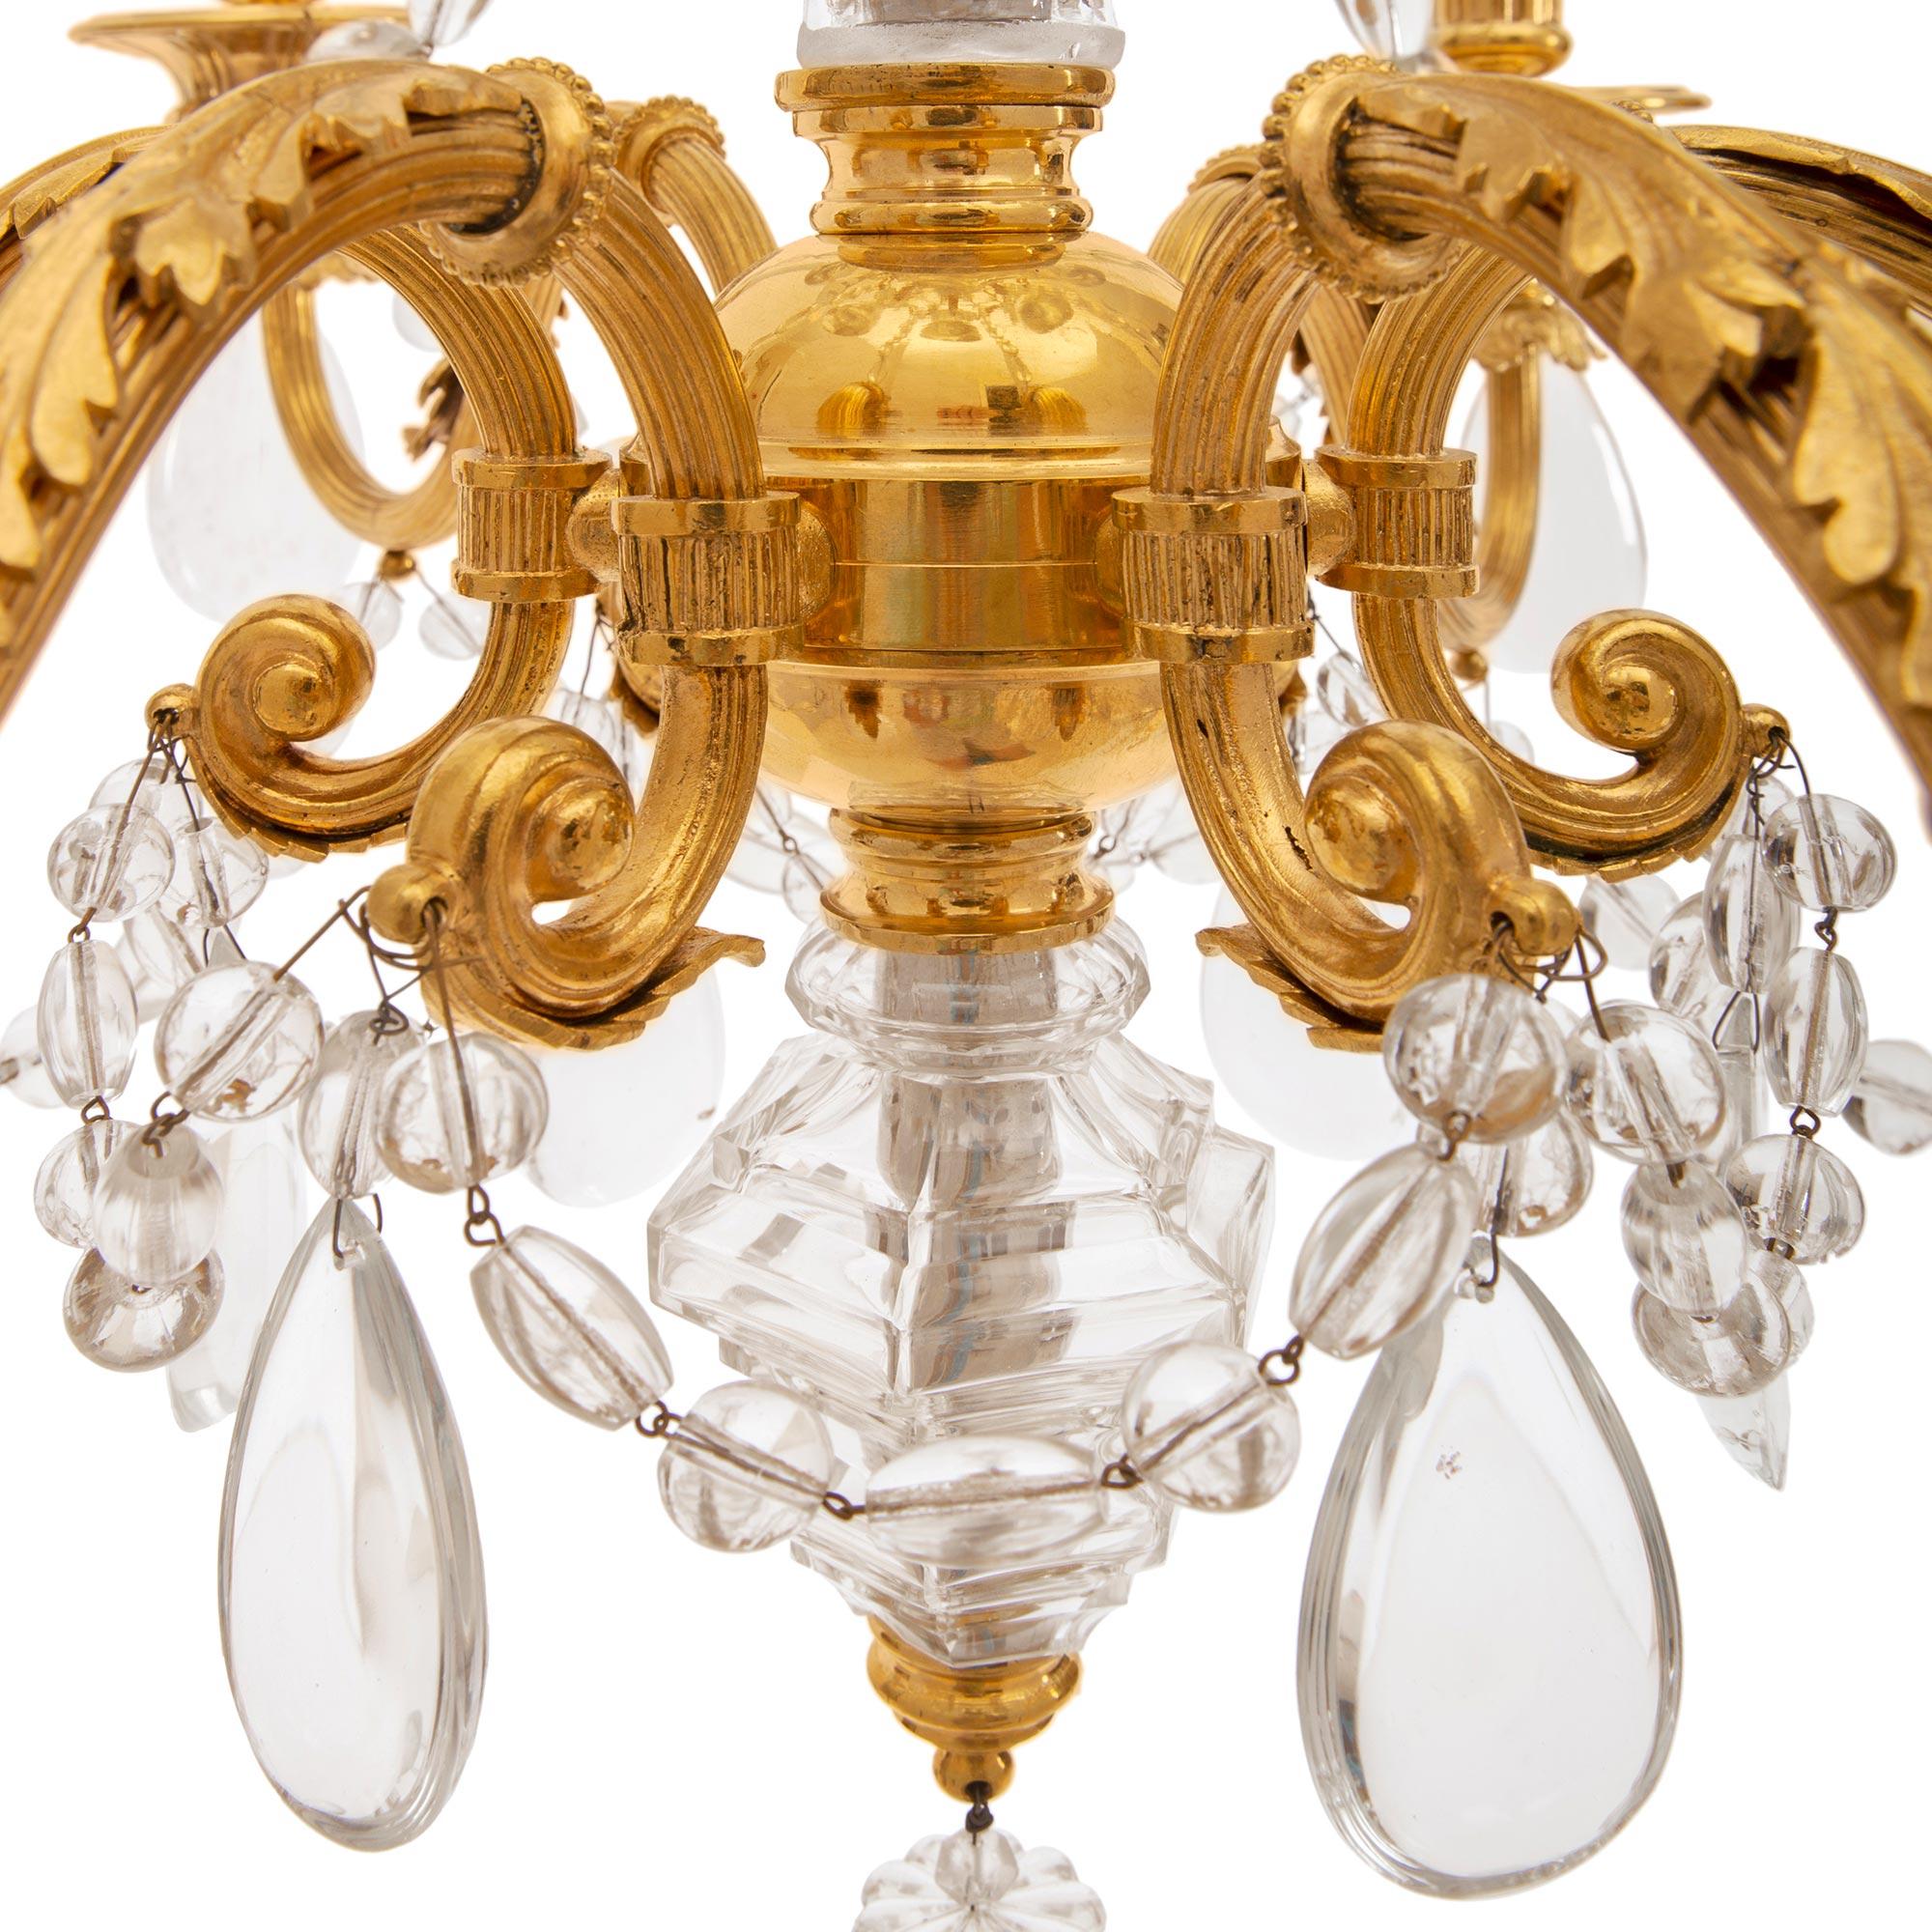 French Mid-19th Century Louis XVI Style Marie Antoinette Crystal Chandelier For Sale 2